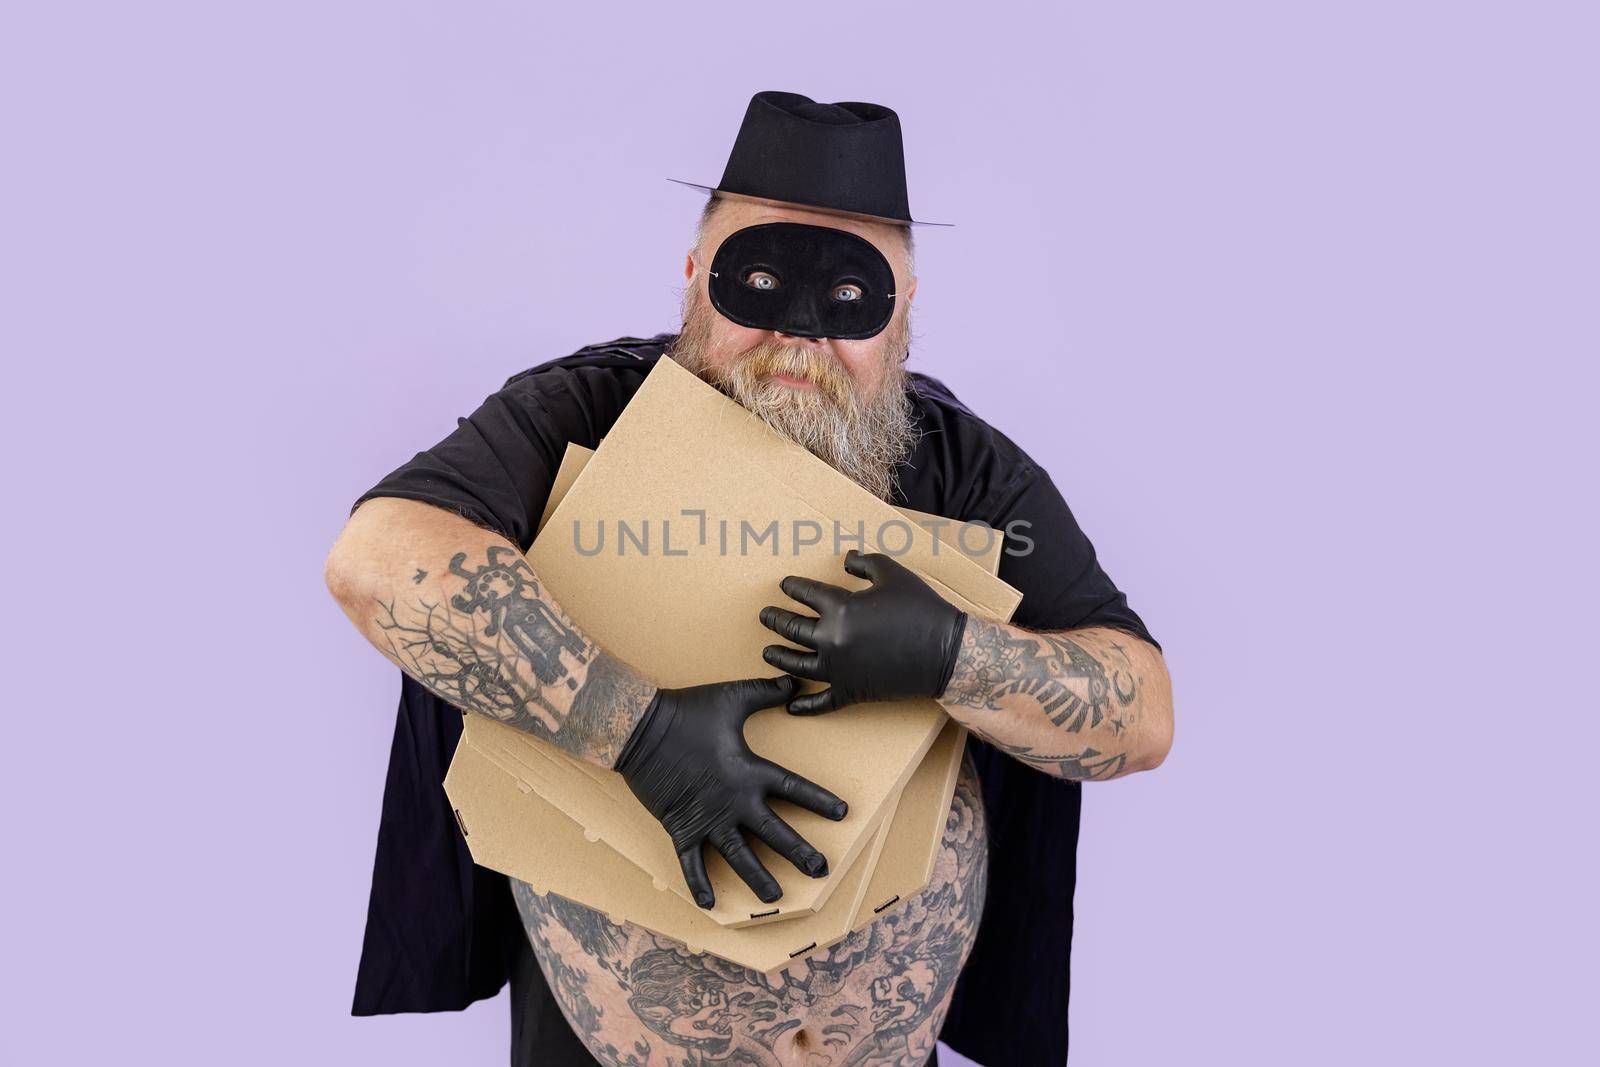 Greedy mature man in Zorro costume with overweight and tattoos hugs brown boxes of pizza on purple background in studio